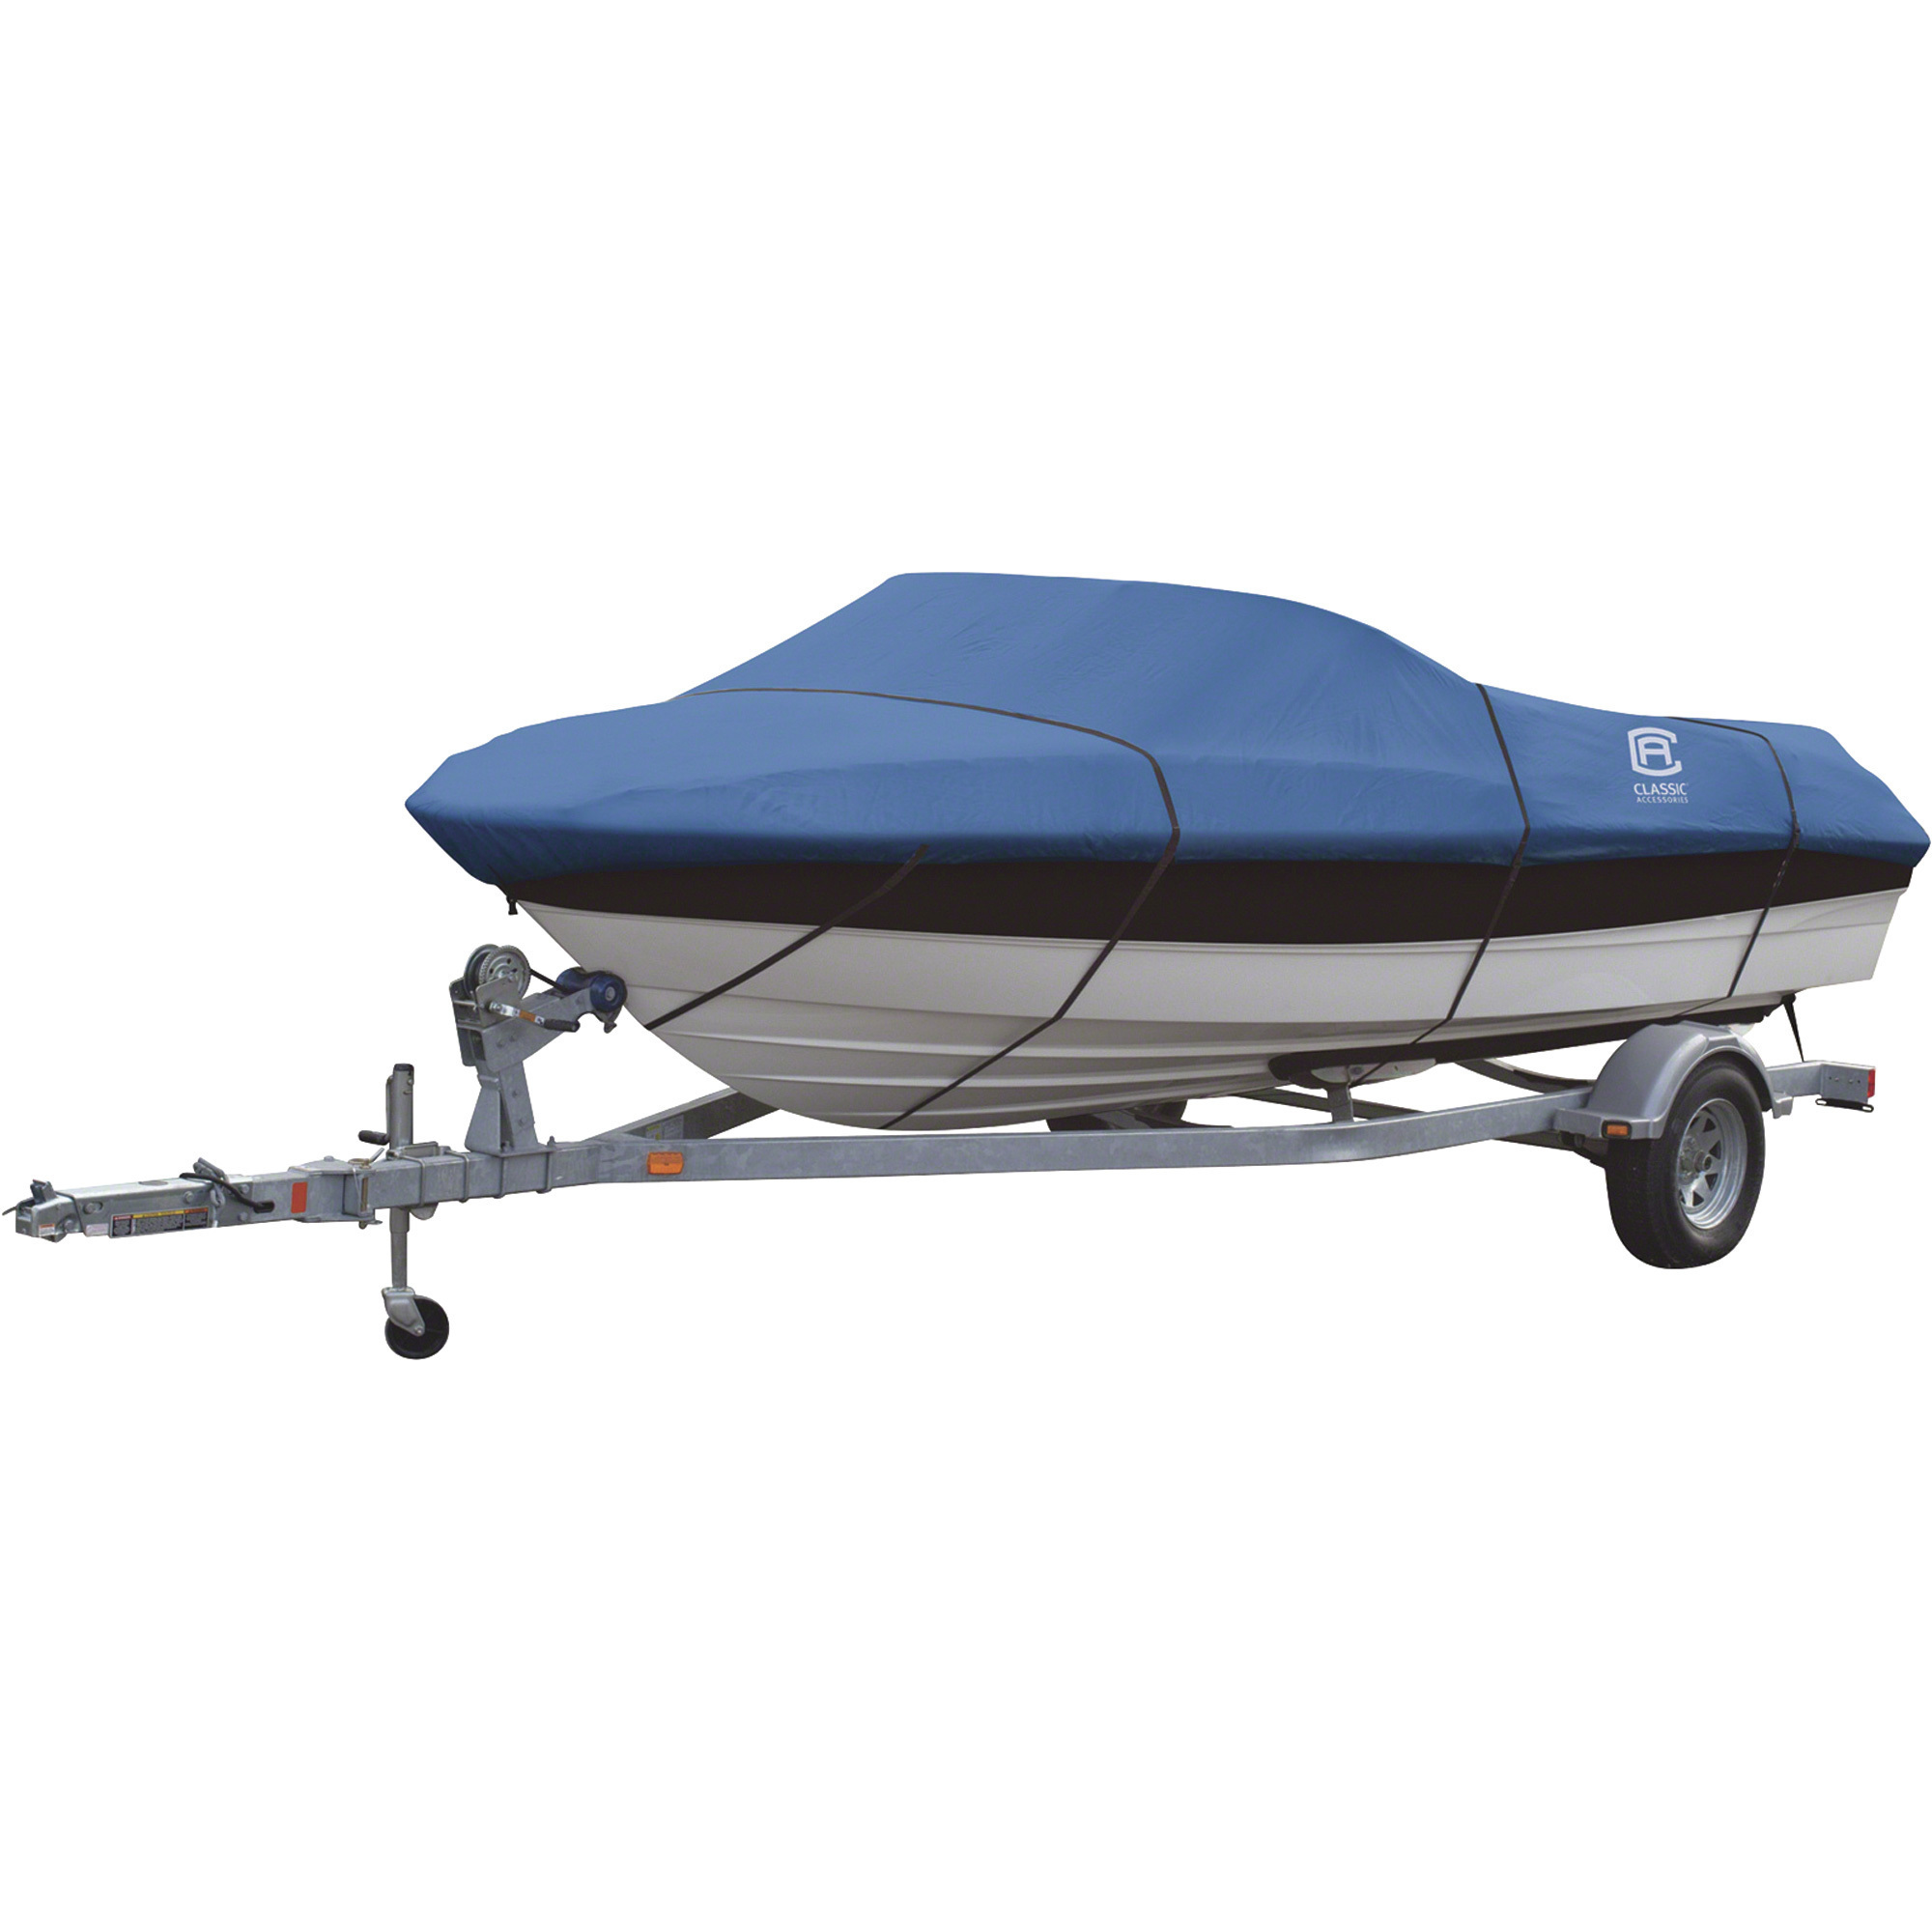 Classic Accessories Stellex All Seasons Boat Cover, Blue, Fits 16ft.-18 1/2ft. x 98Inch W Boats, Model 20-147-100501-00